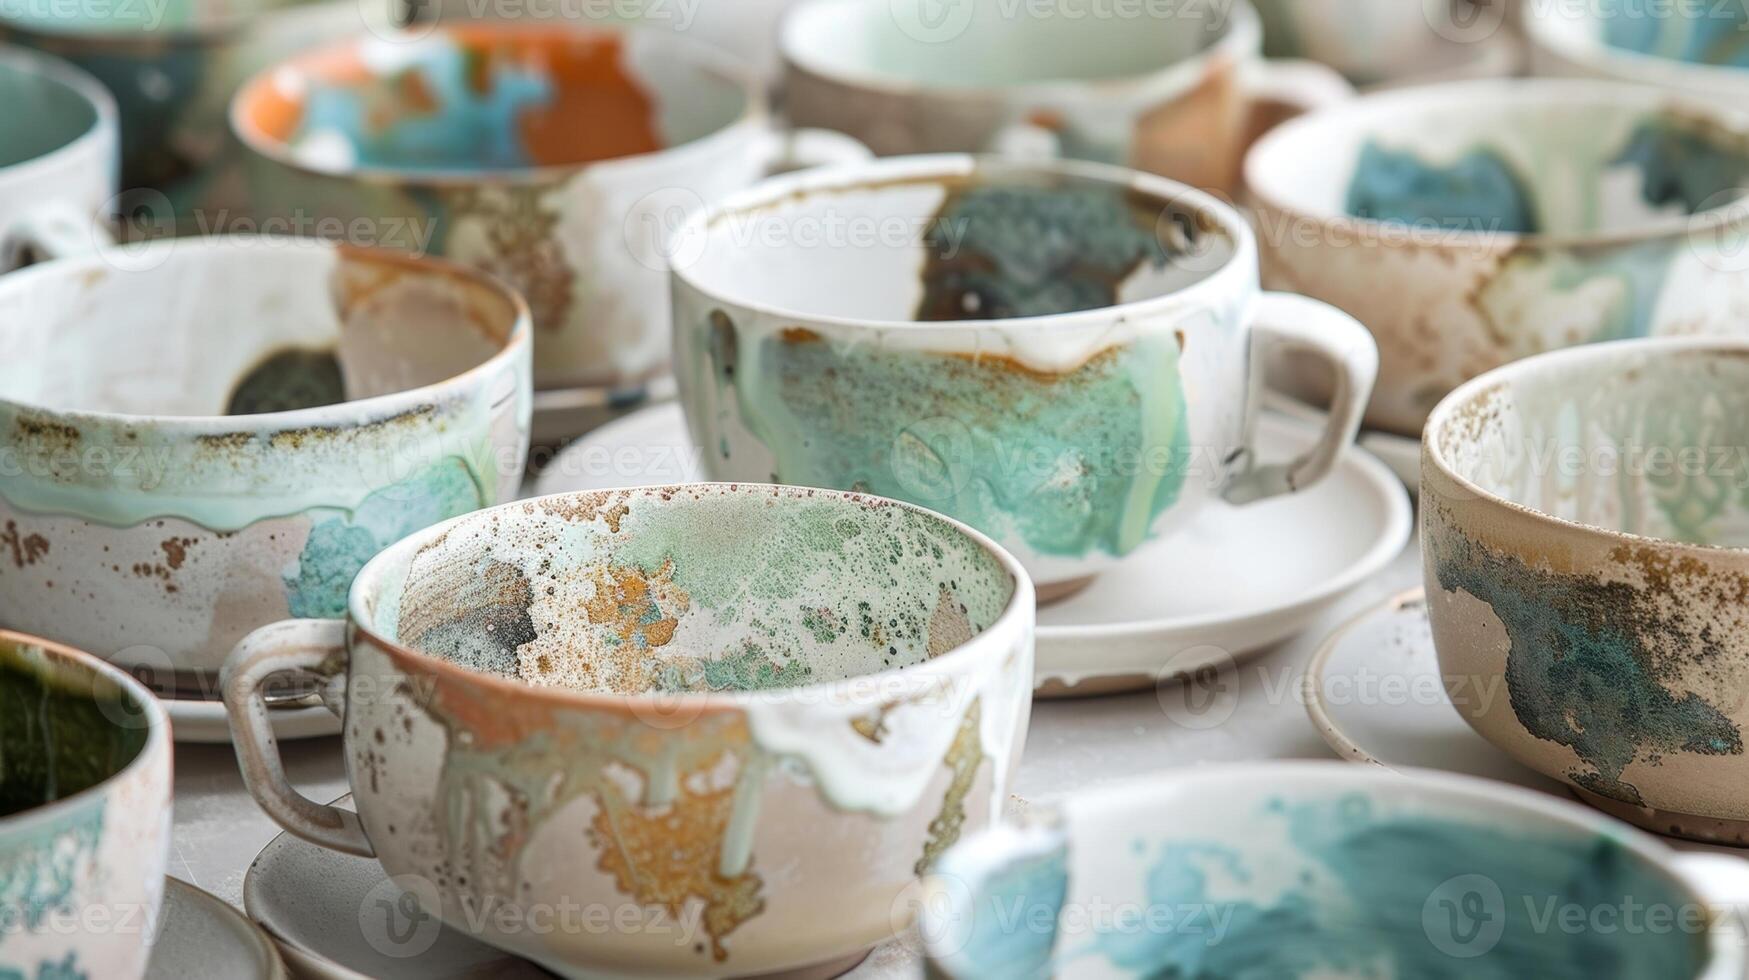 This series of ceramic cups and saucers each with its own unique abstract pattern invites the viewer to appreciate the beauty in imperfection. photo